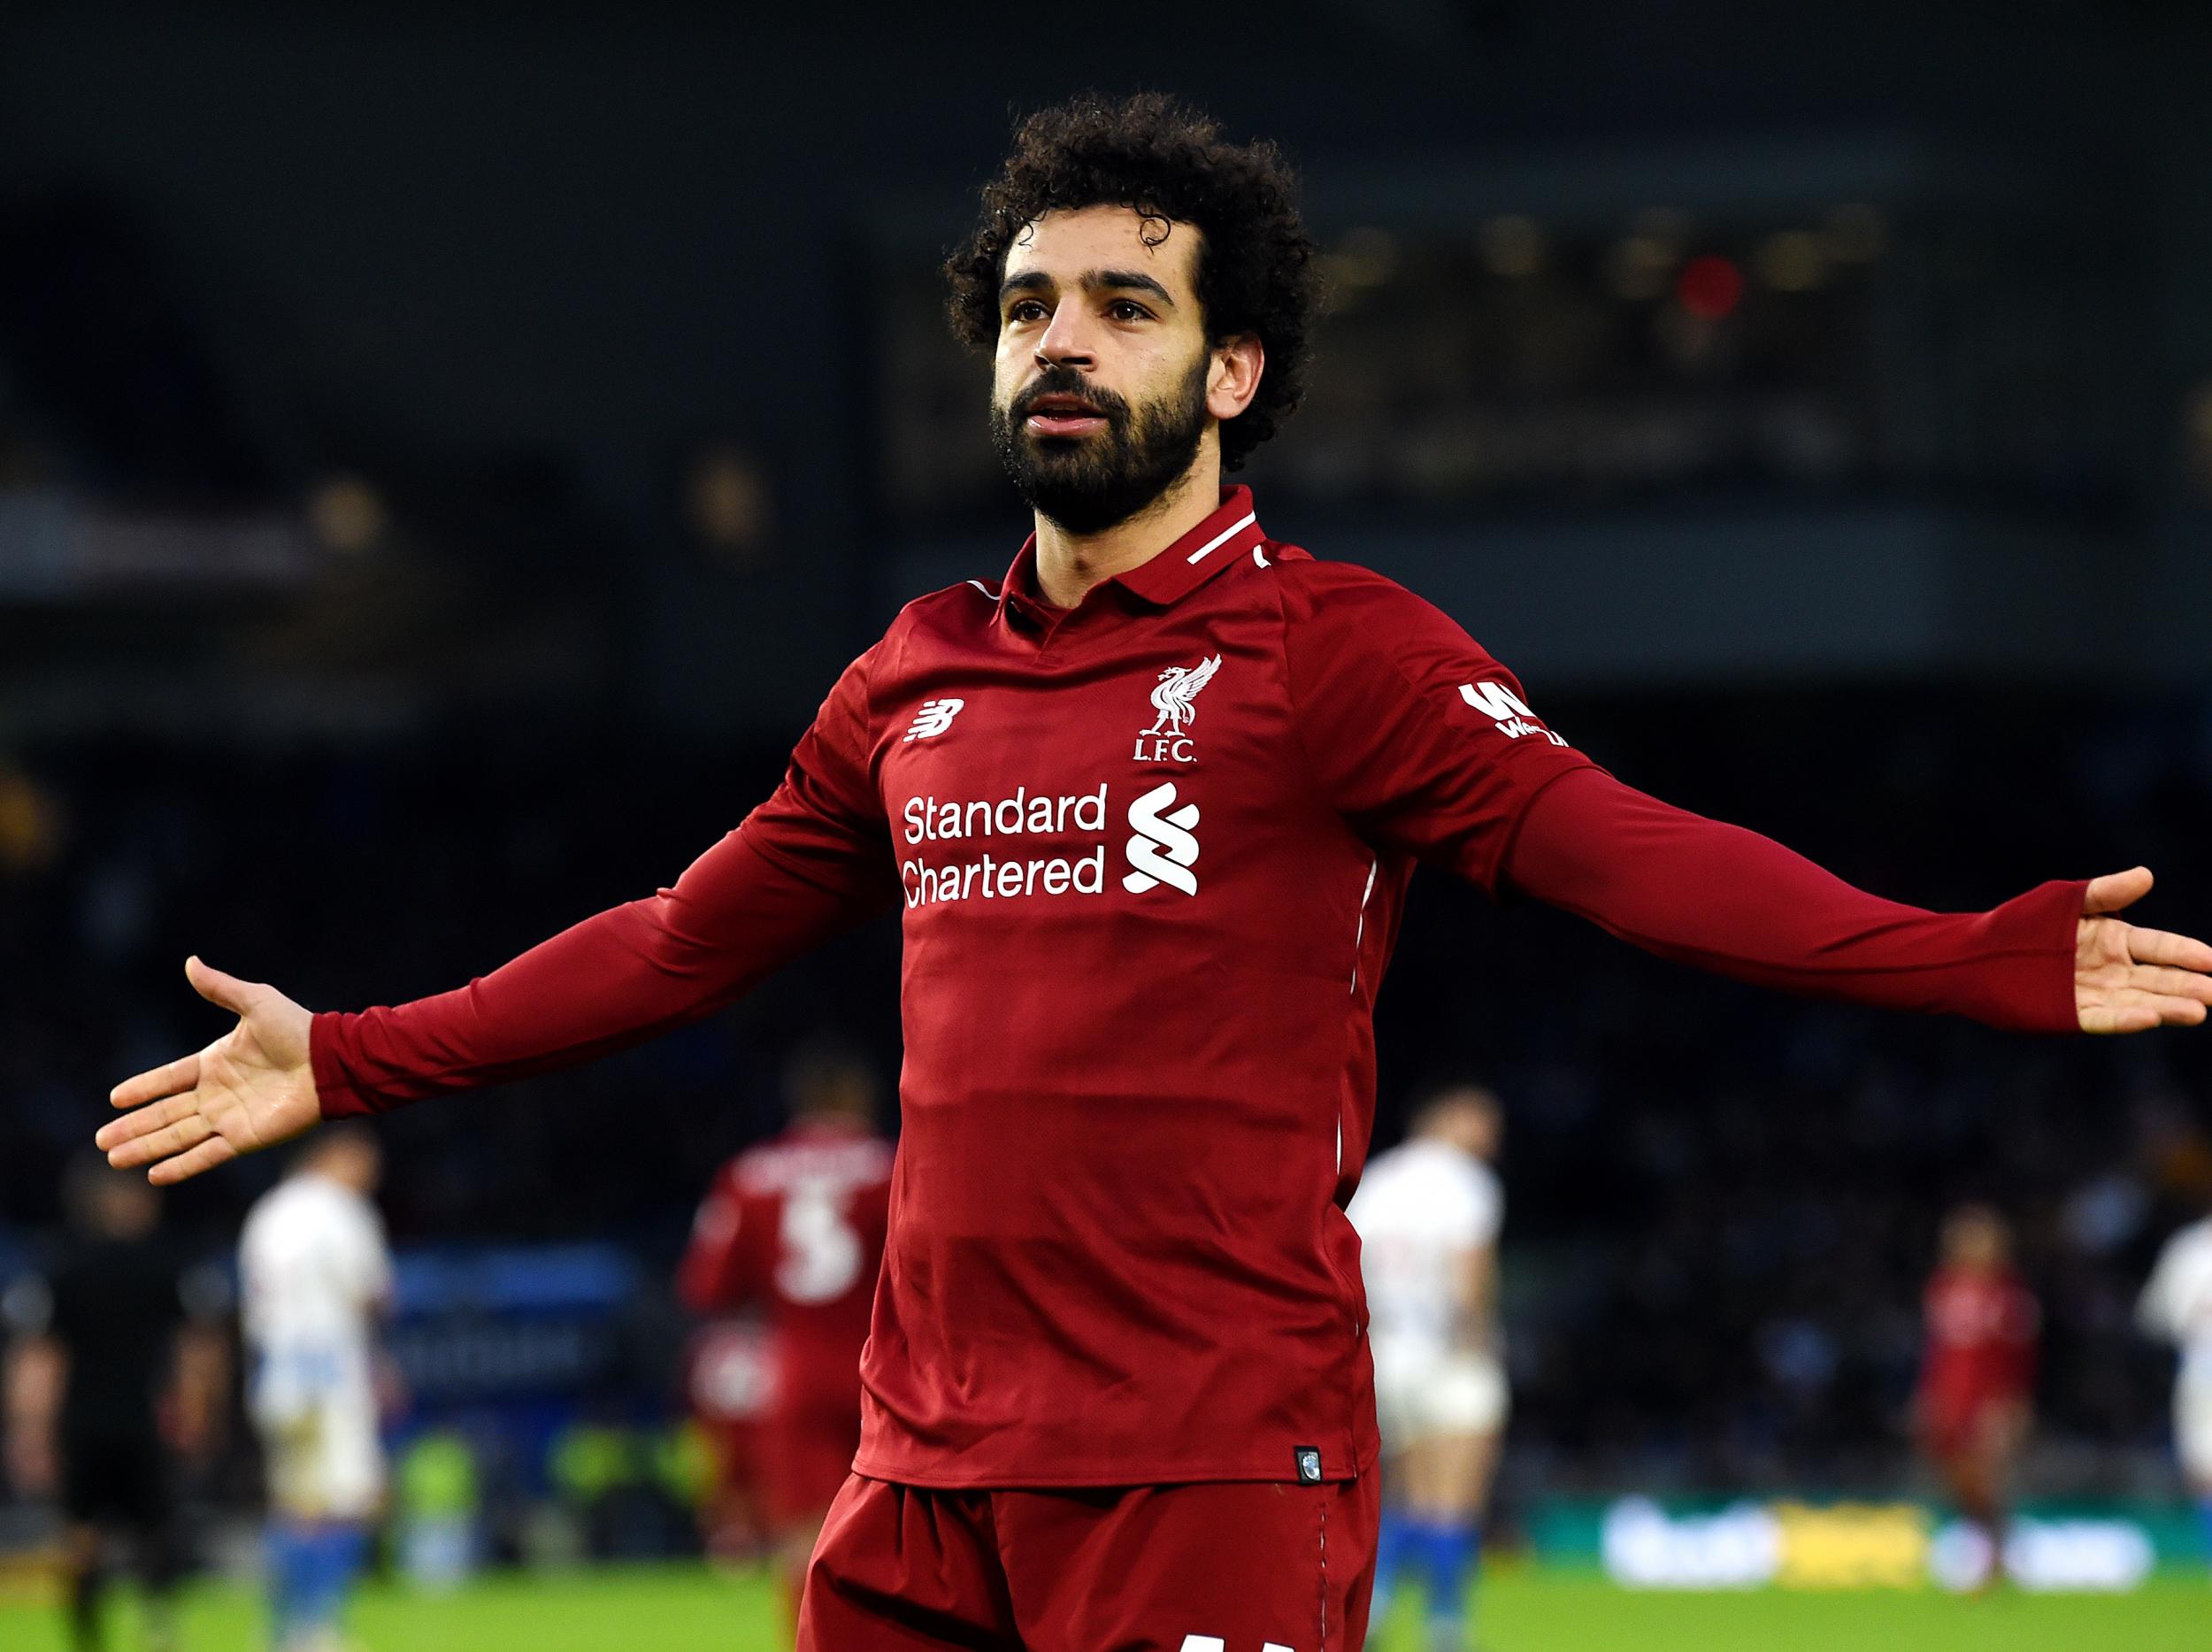 Liverpool Premier League fixtures 2019/20 revealed: Full list for new season | The ...2500 x 1867